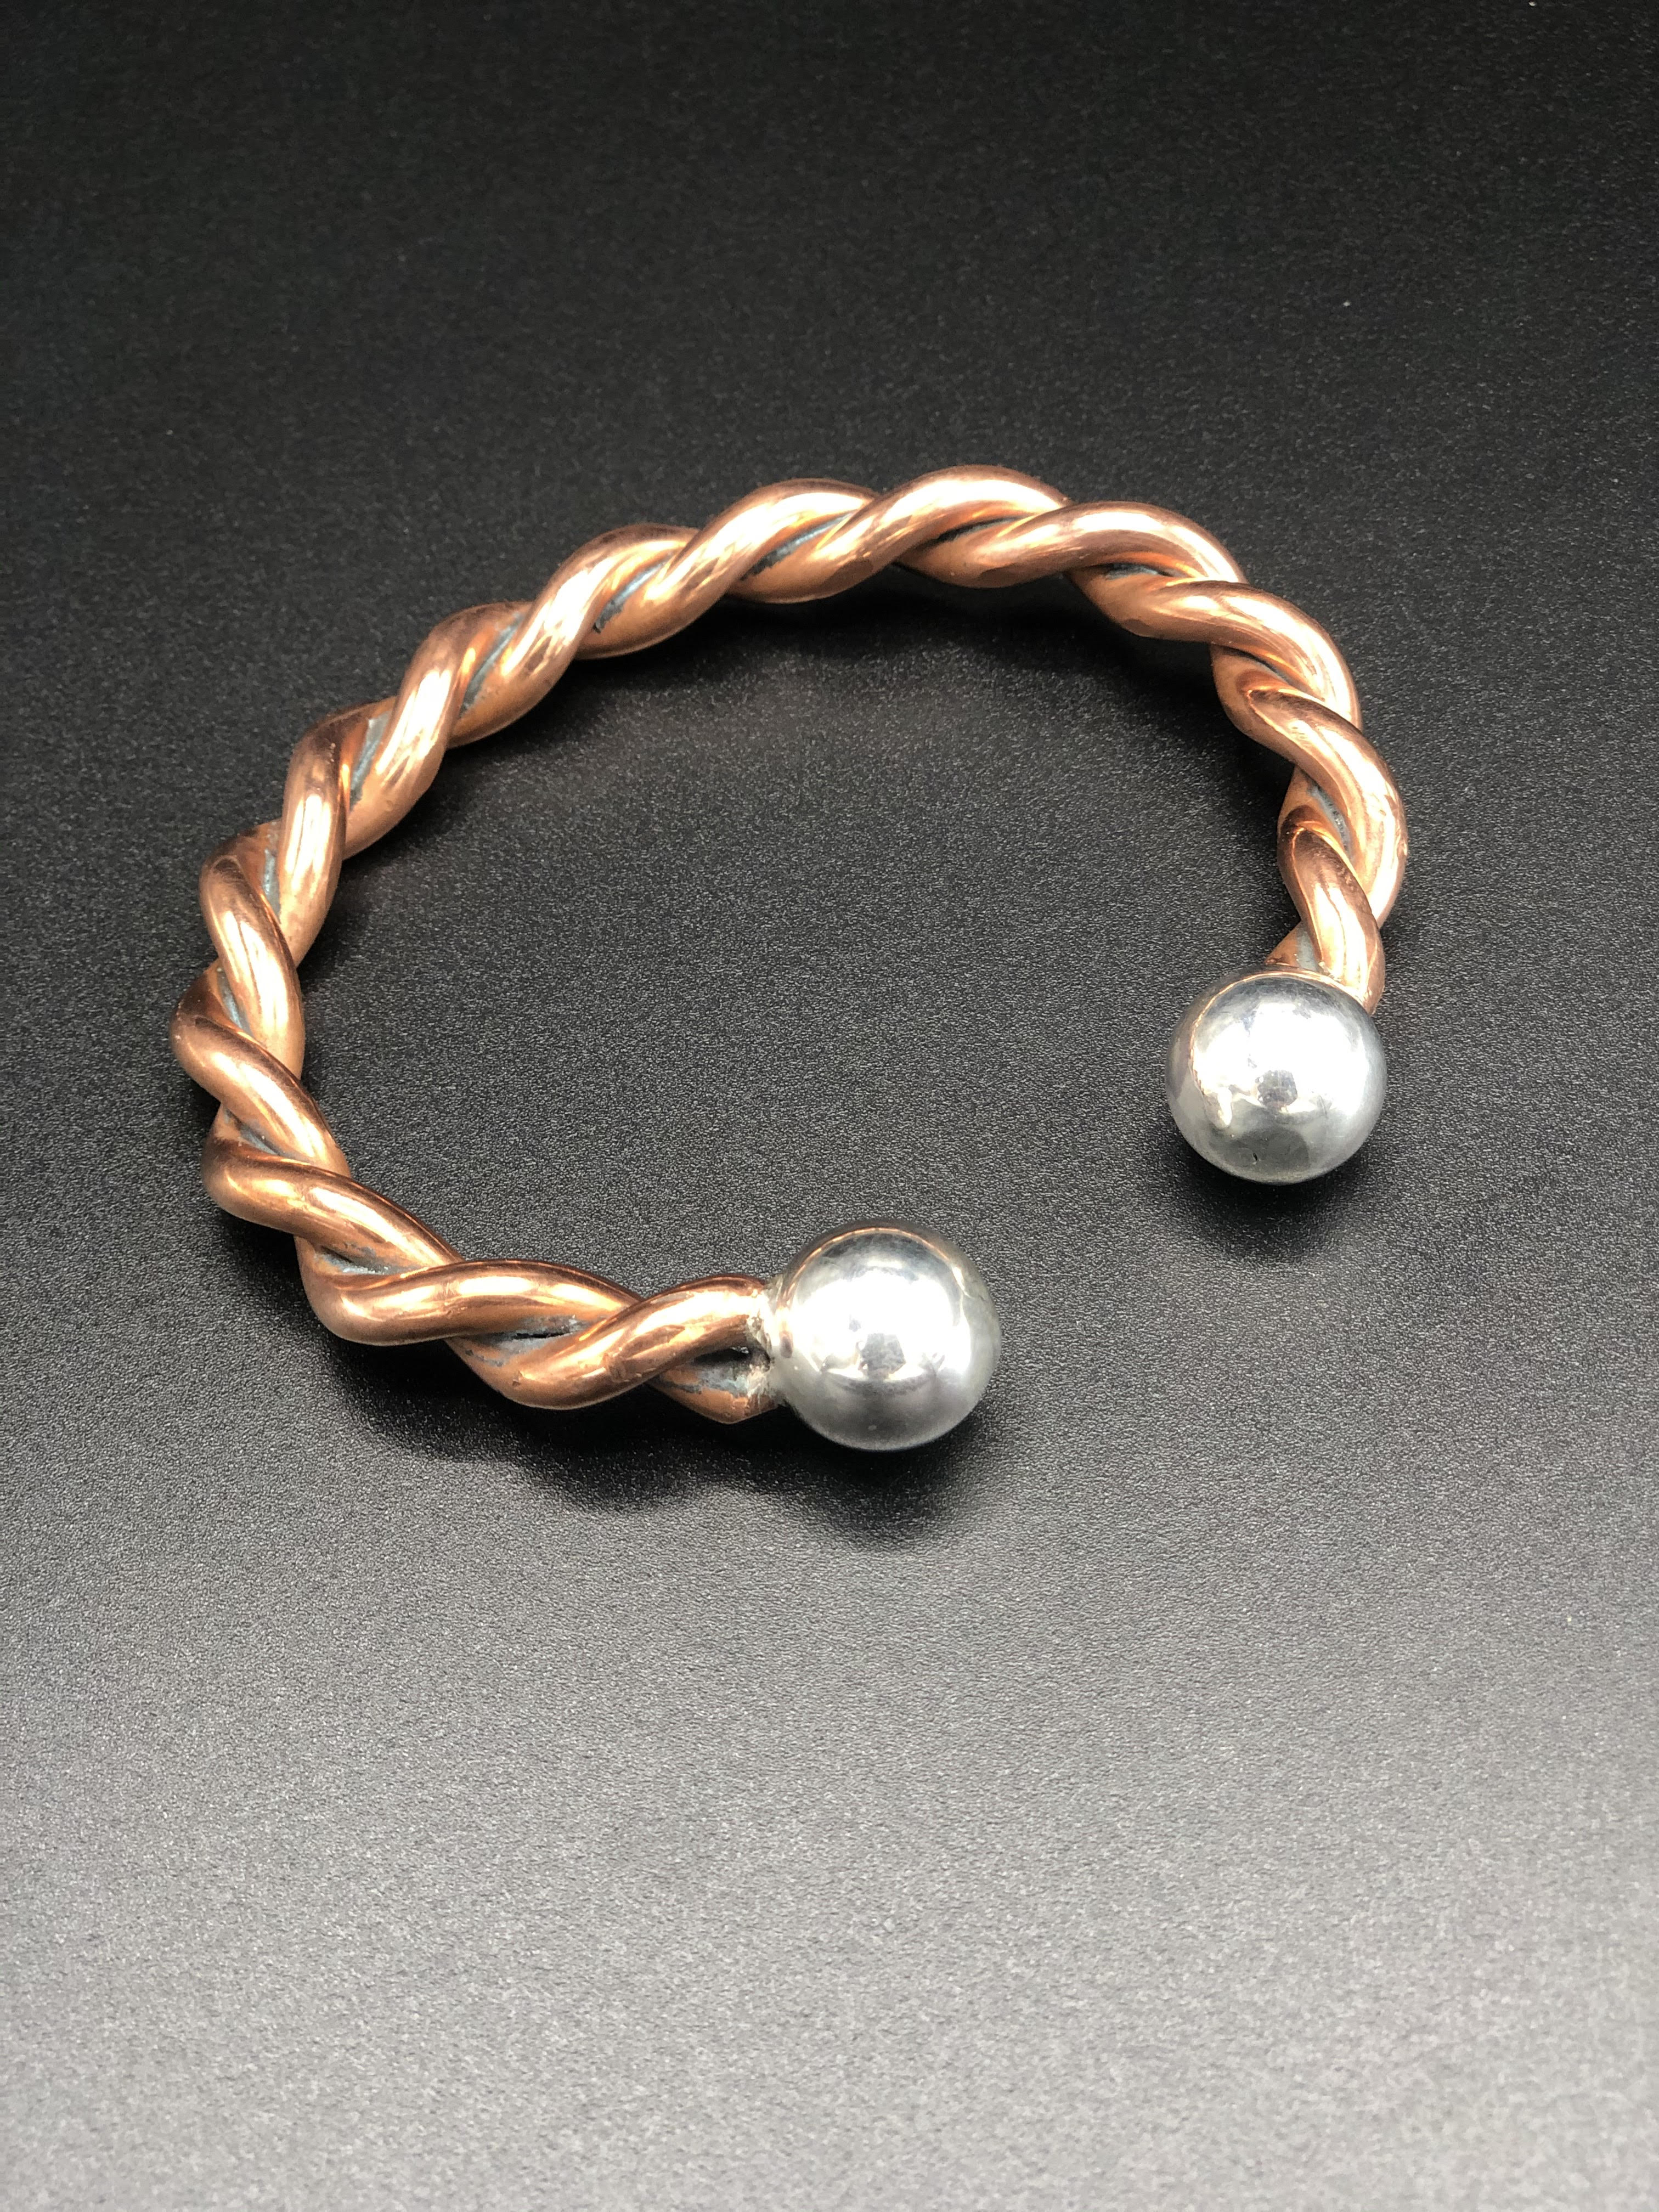 Twisted Cooper 4 gage Bangle Sterling Silver Balls